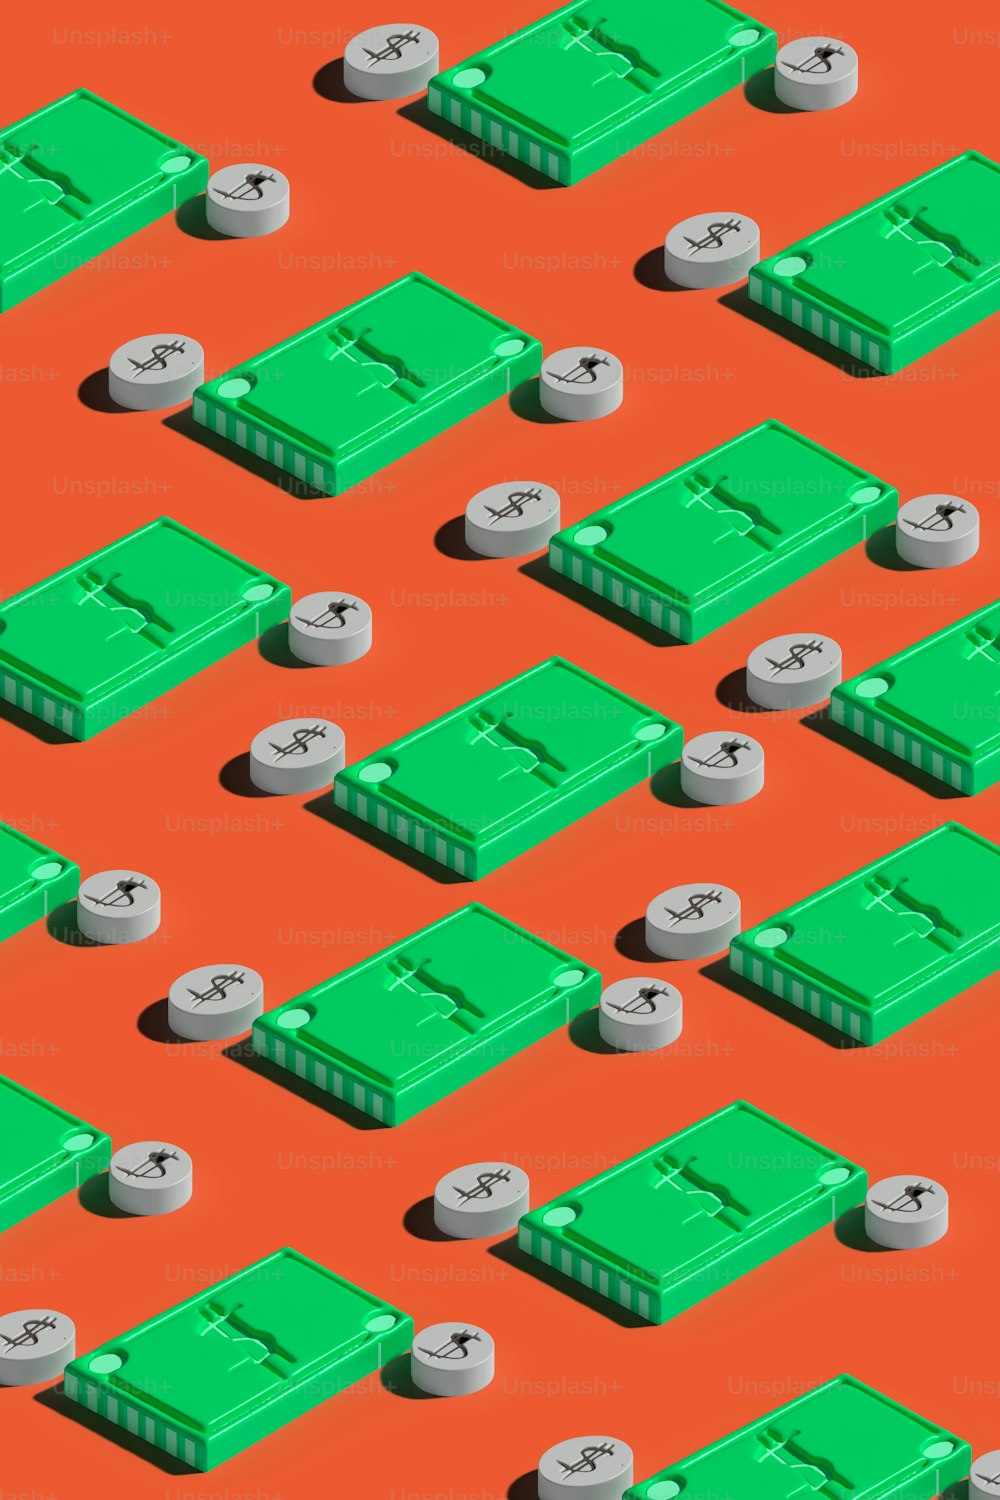 a group of green batteries sitting on top of each other